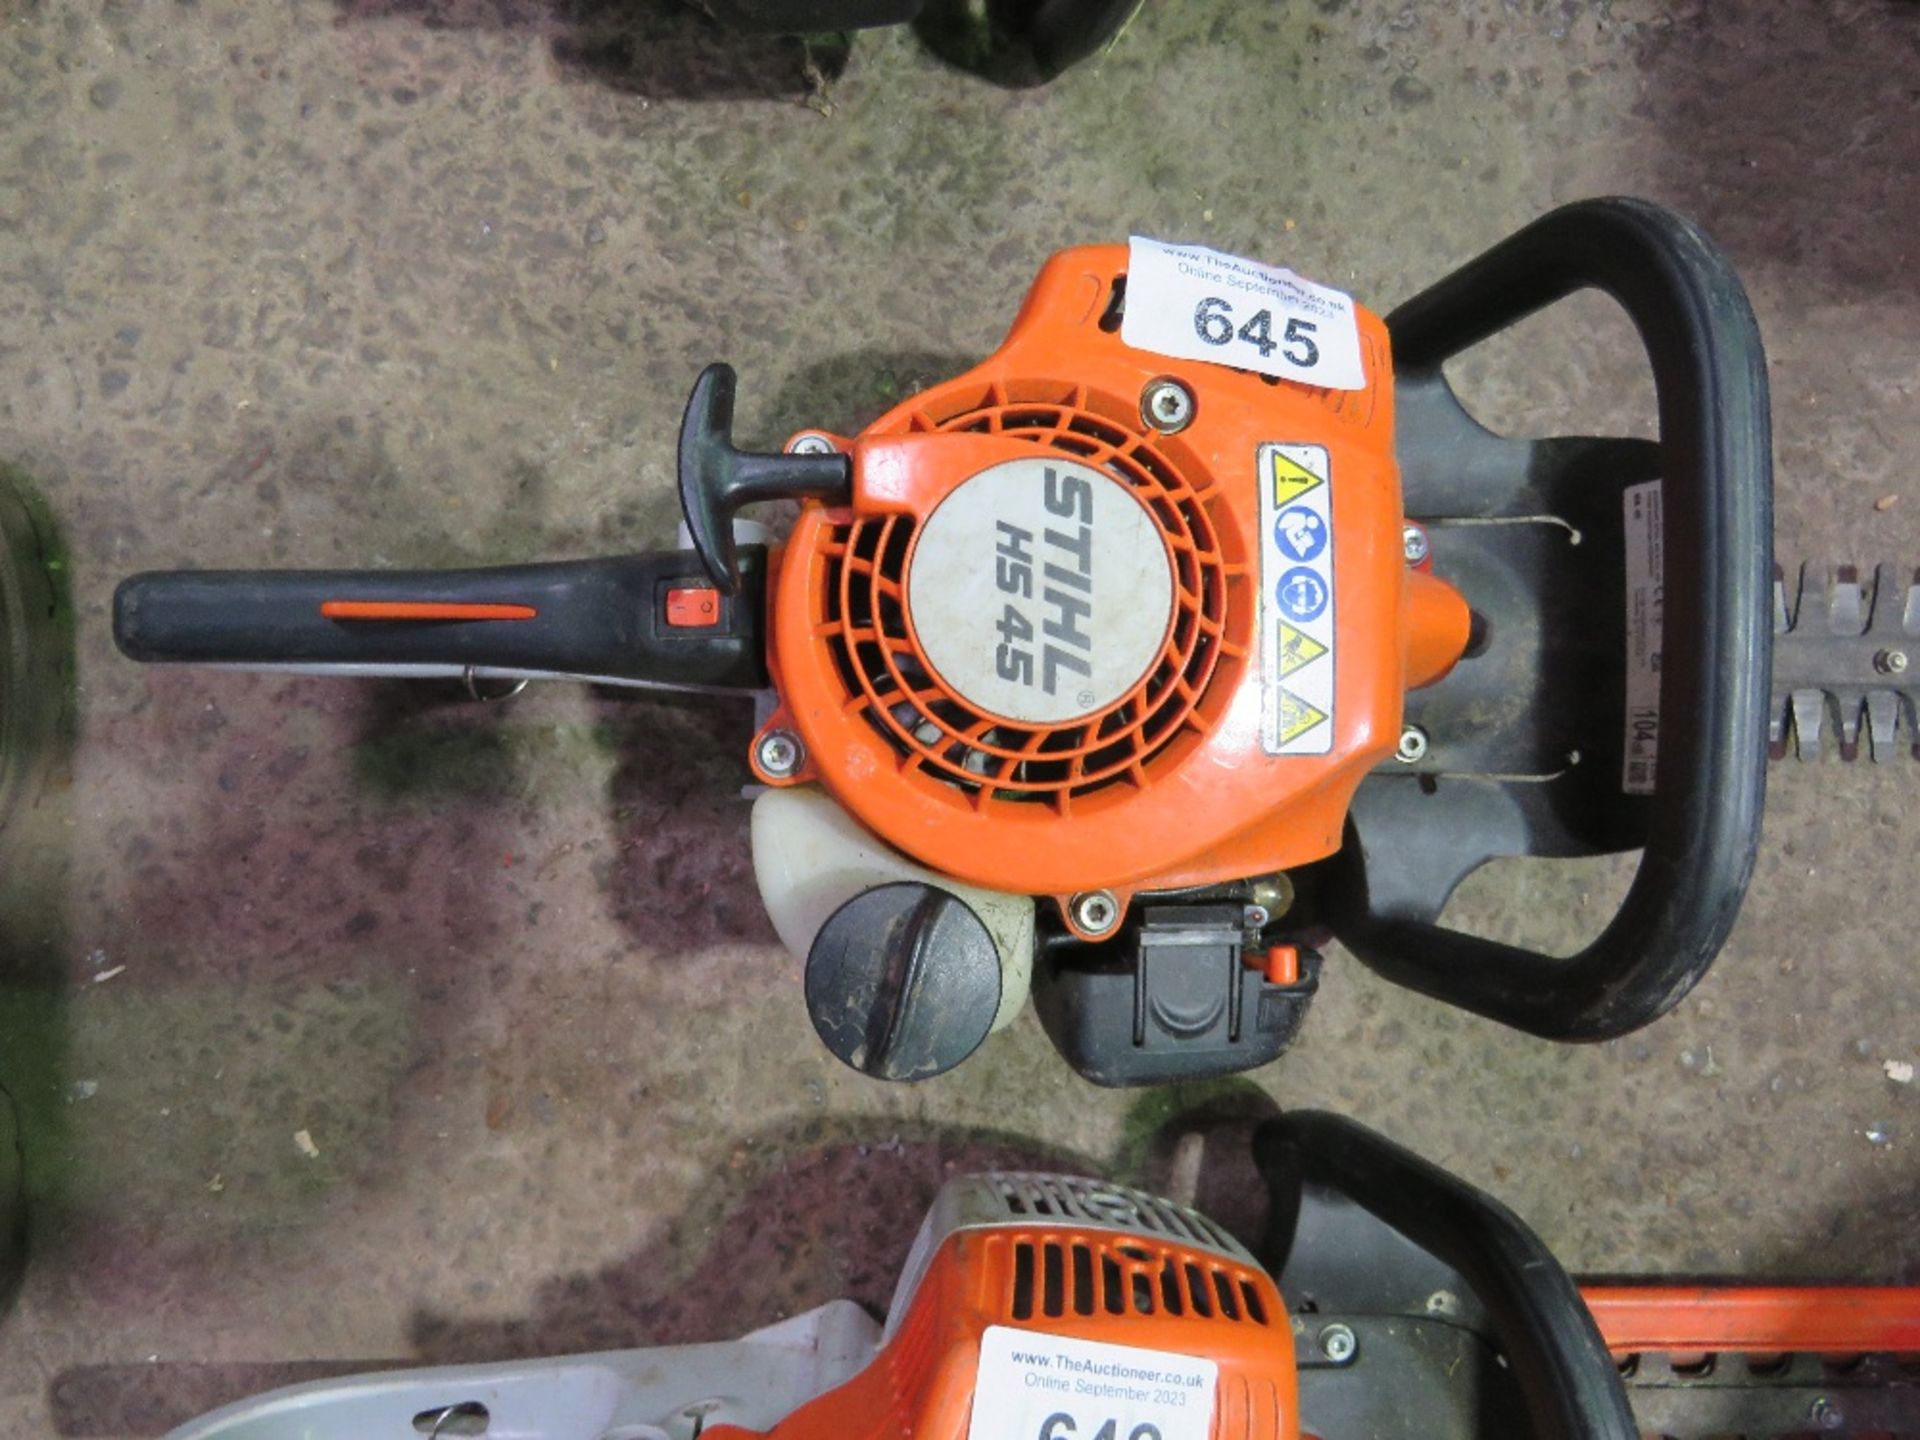 STIHL HS45 PETROL ENGINED PROFESSIONAL HEDGE CUTTER. DIRECT FROM LOCAL LANDSCAPE COMPANY WHO ARE CLO - Image 2 of 5